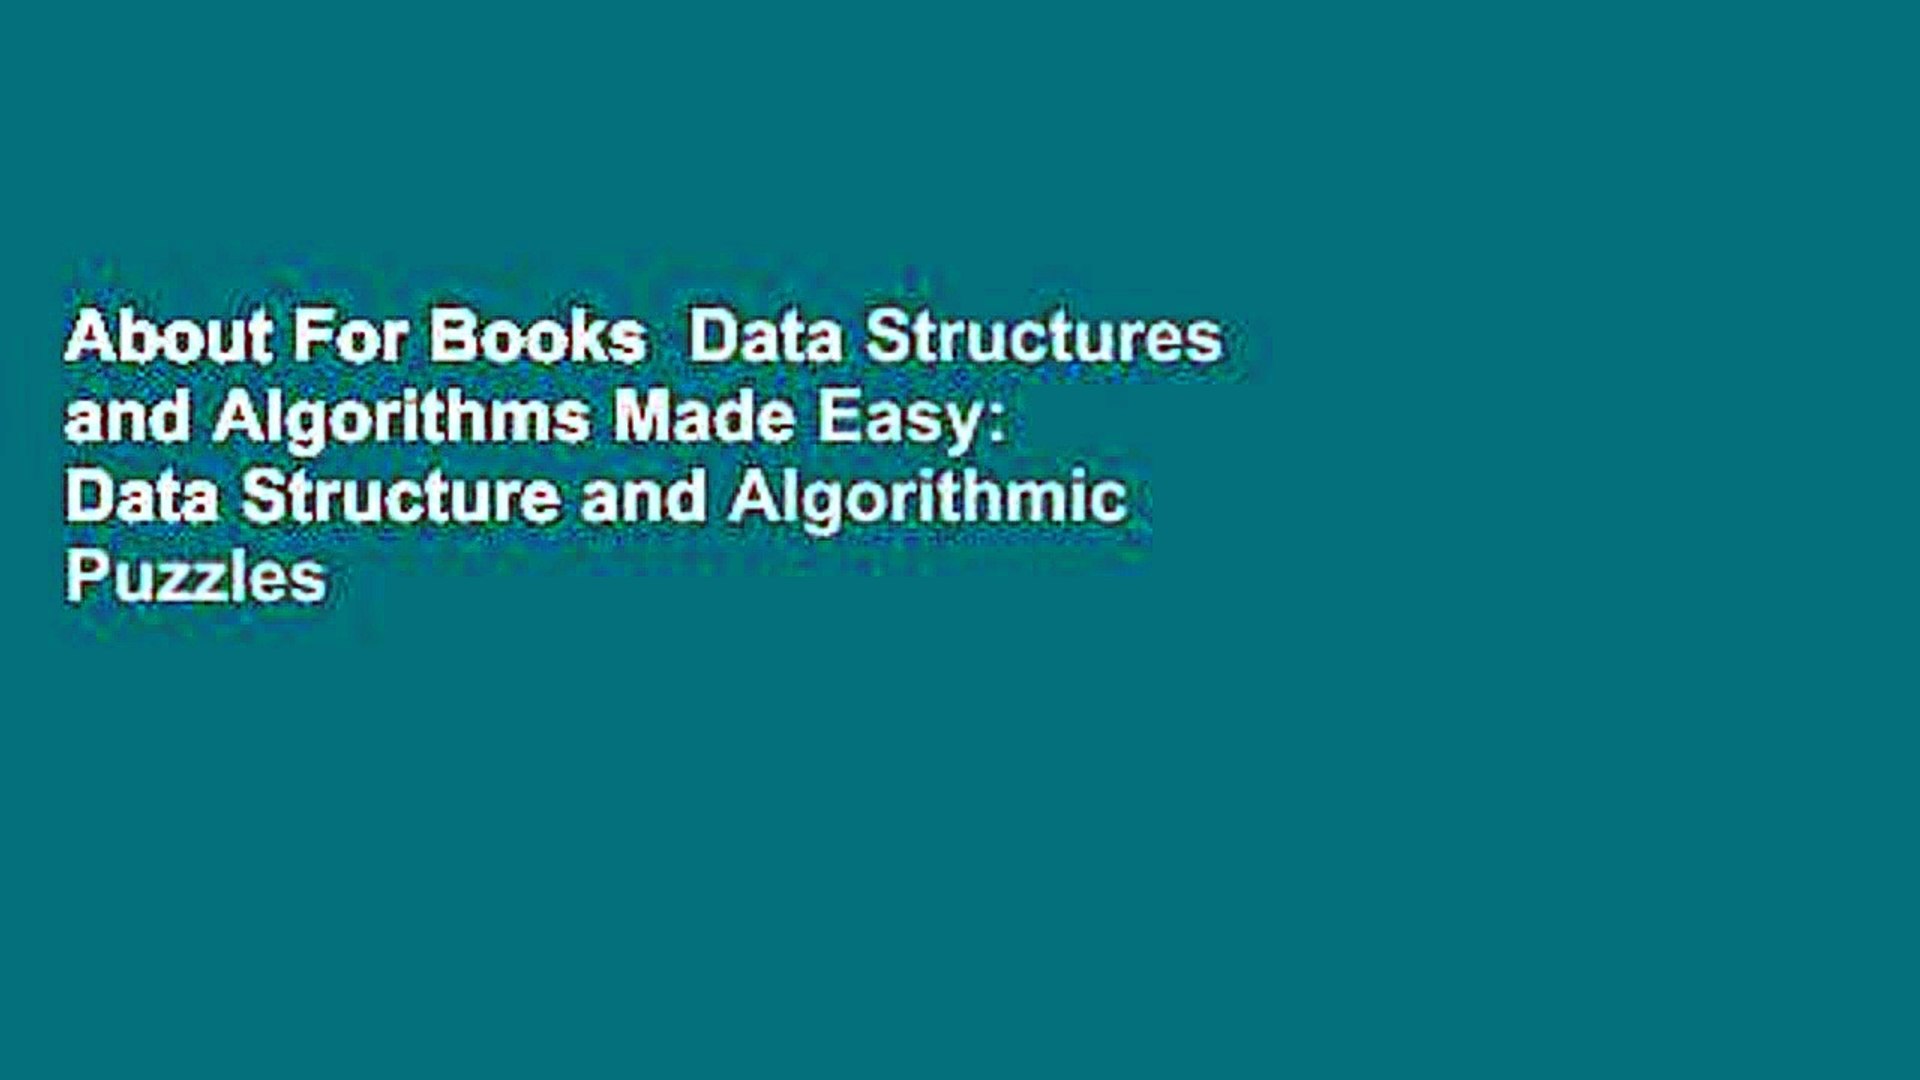 About For Books  Data Structures and Algorithms Made Easy: Data Structure and Algorithmic Puzzles